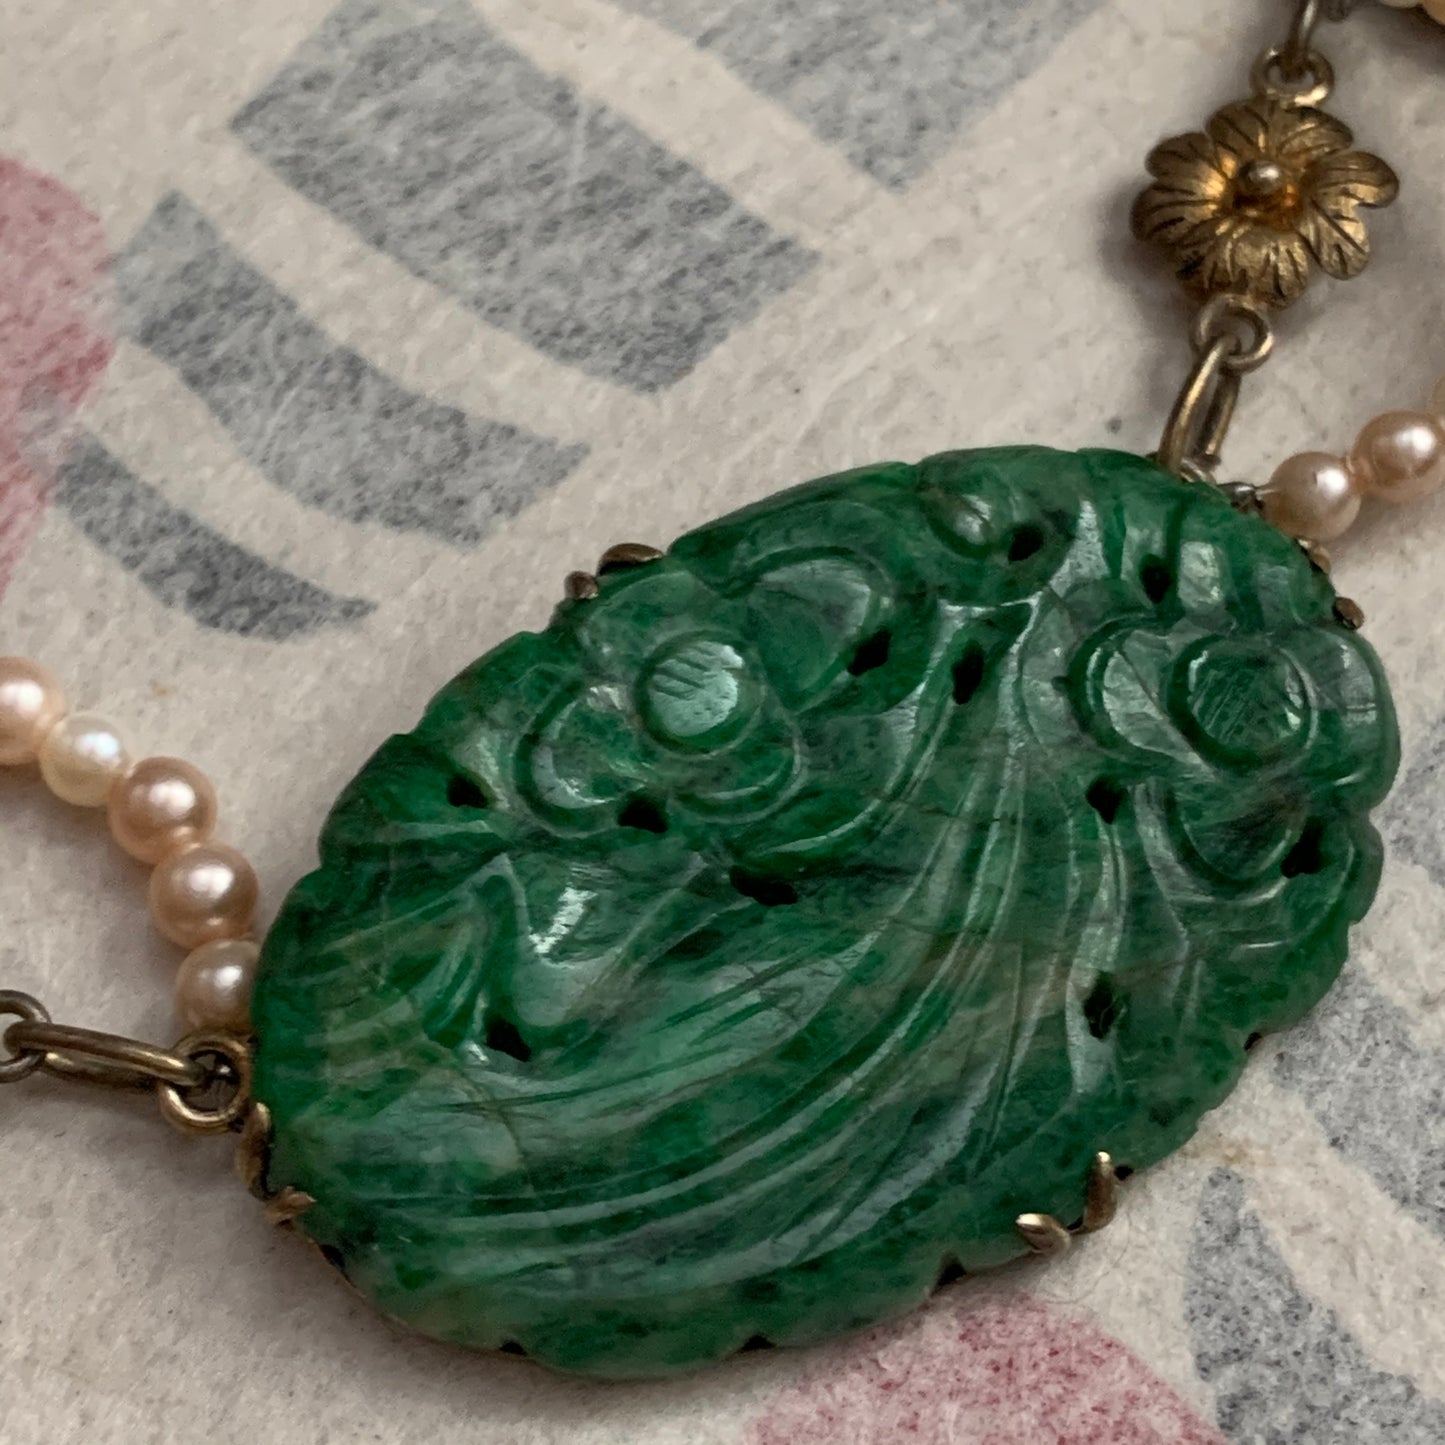 A spinach green jade necklace